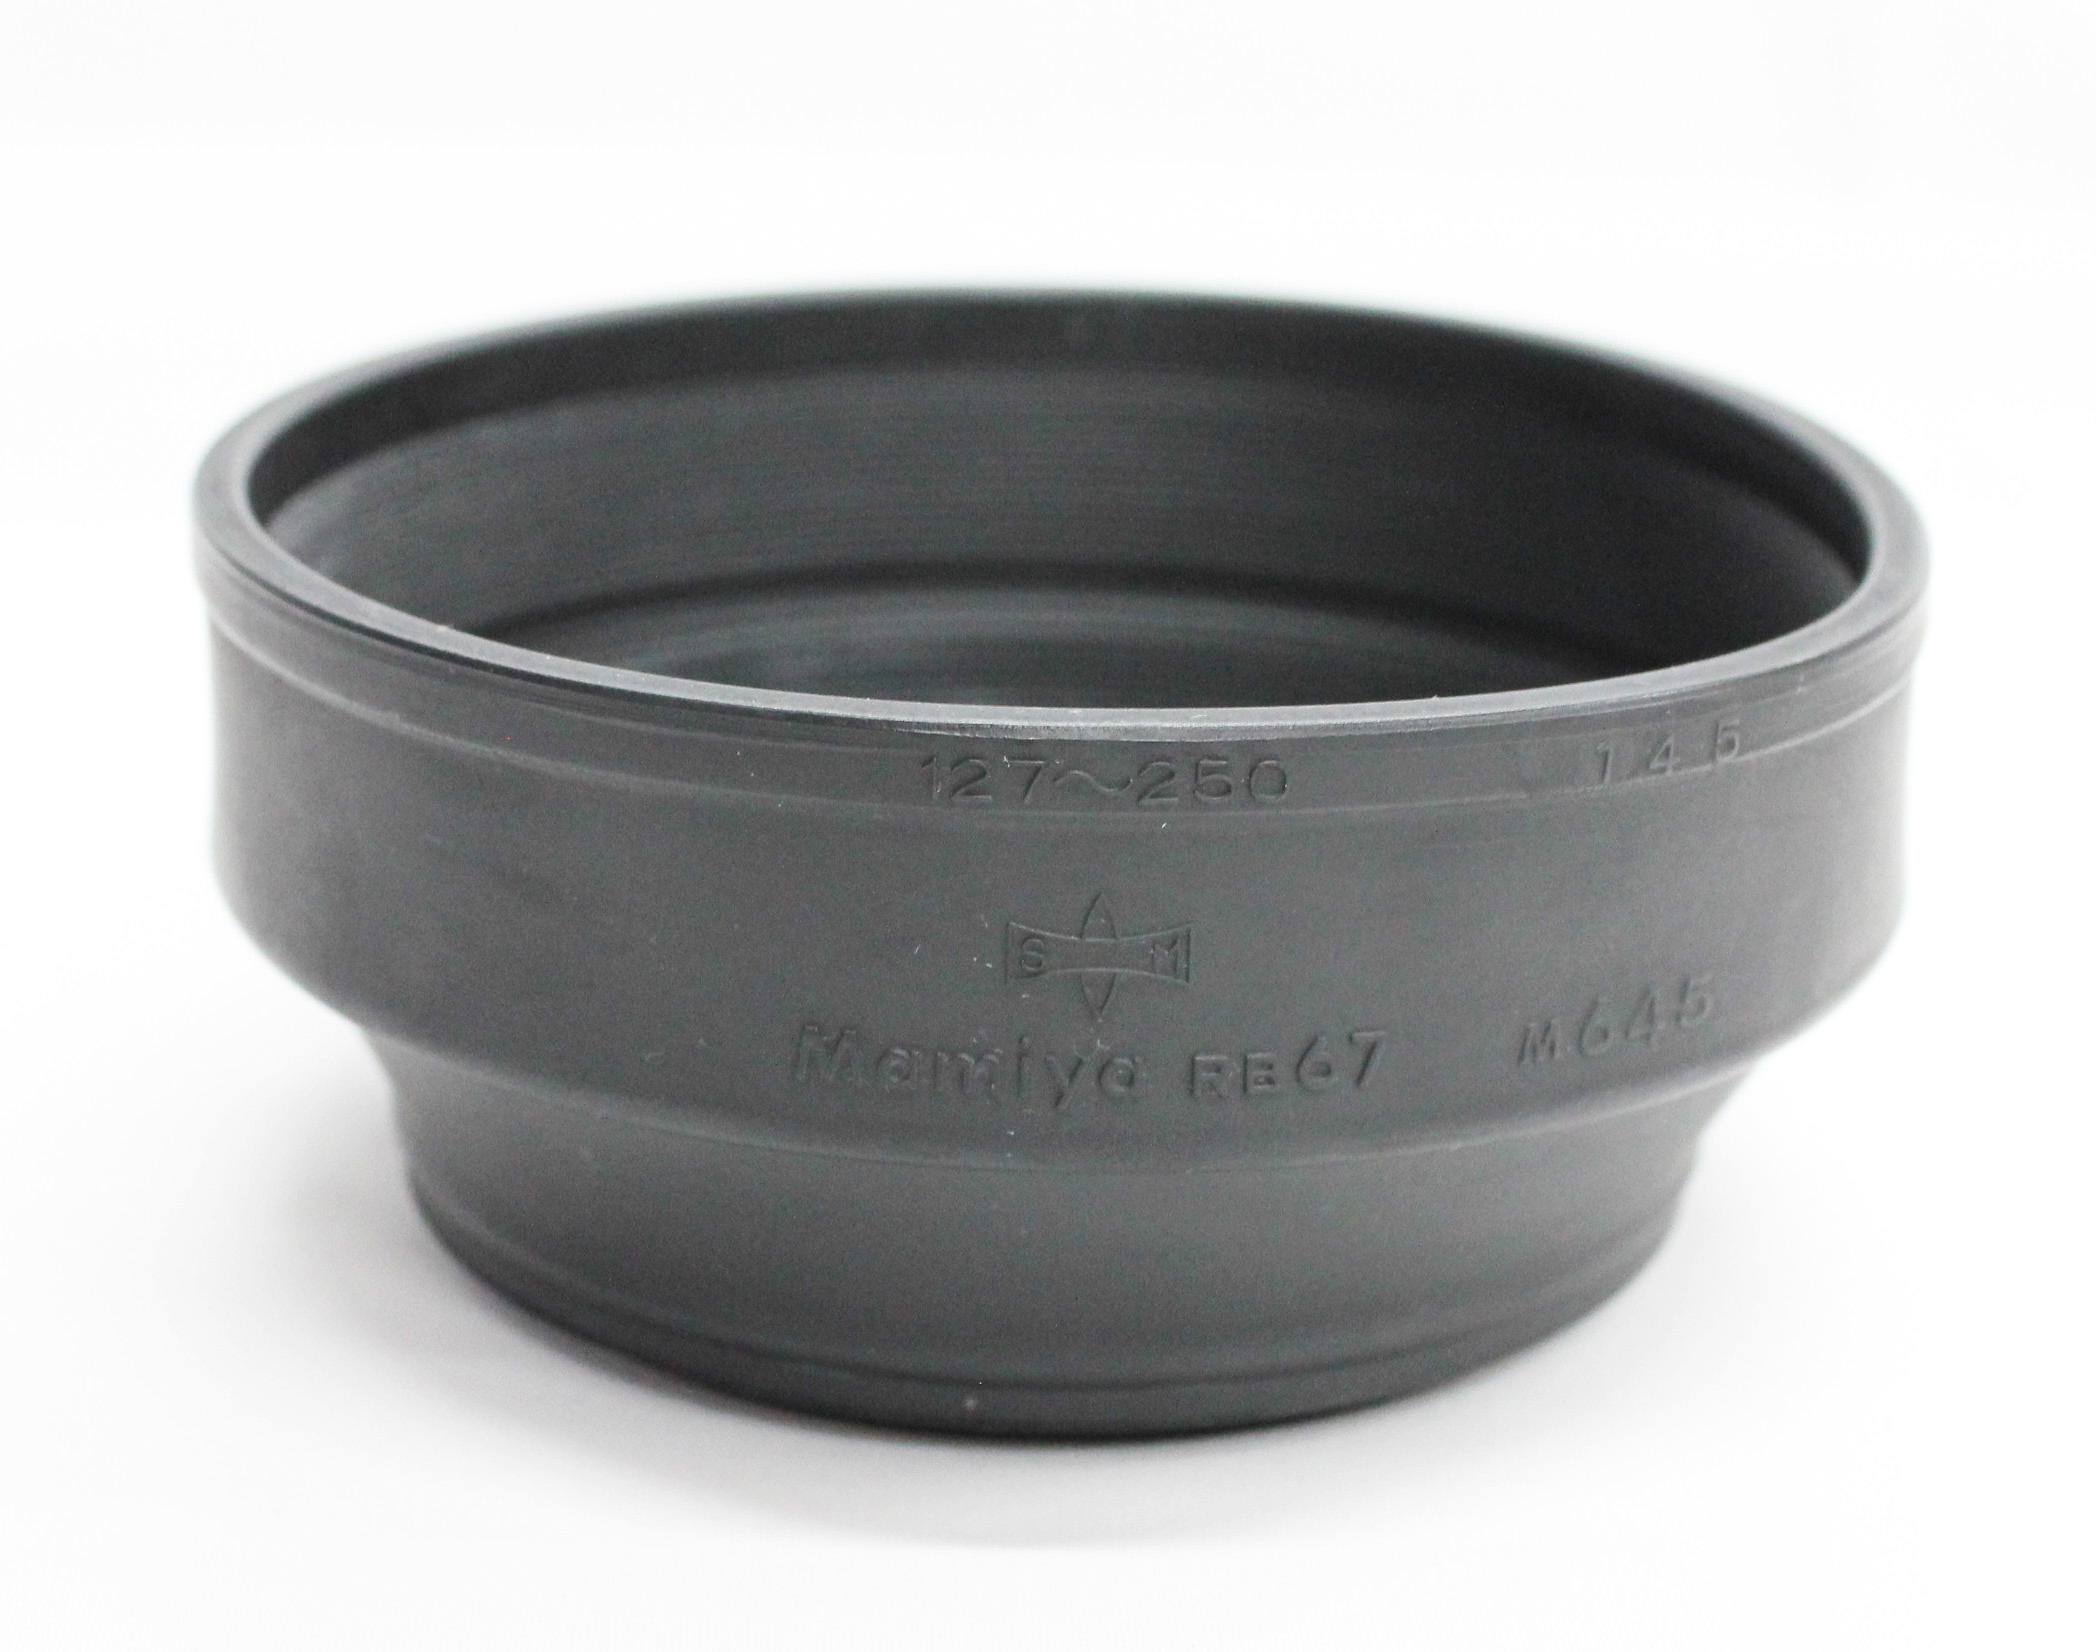 Japan Used Camera Shop | [N.Mint] Mamiya Rubber Lens Hood 127-250 for RB67 M645 77mm from Japan